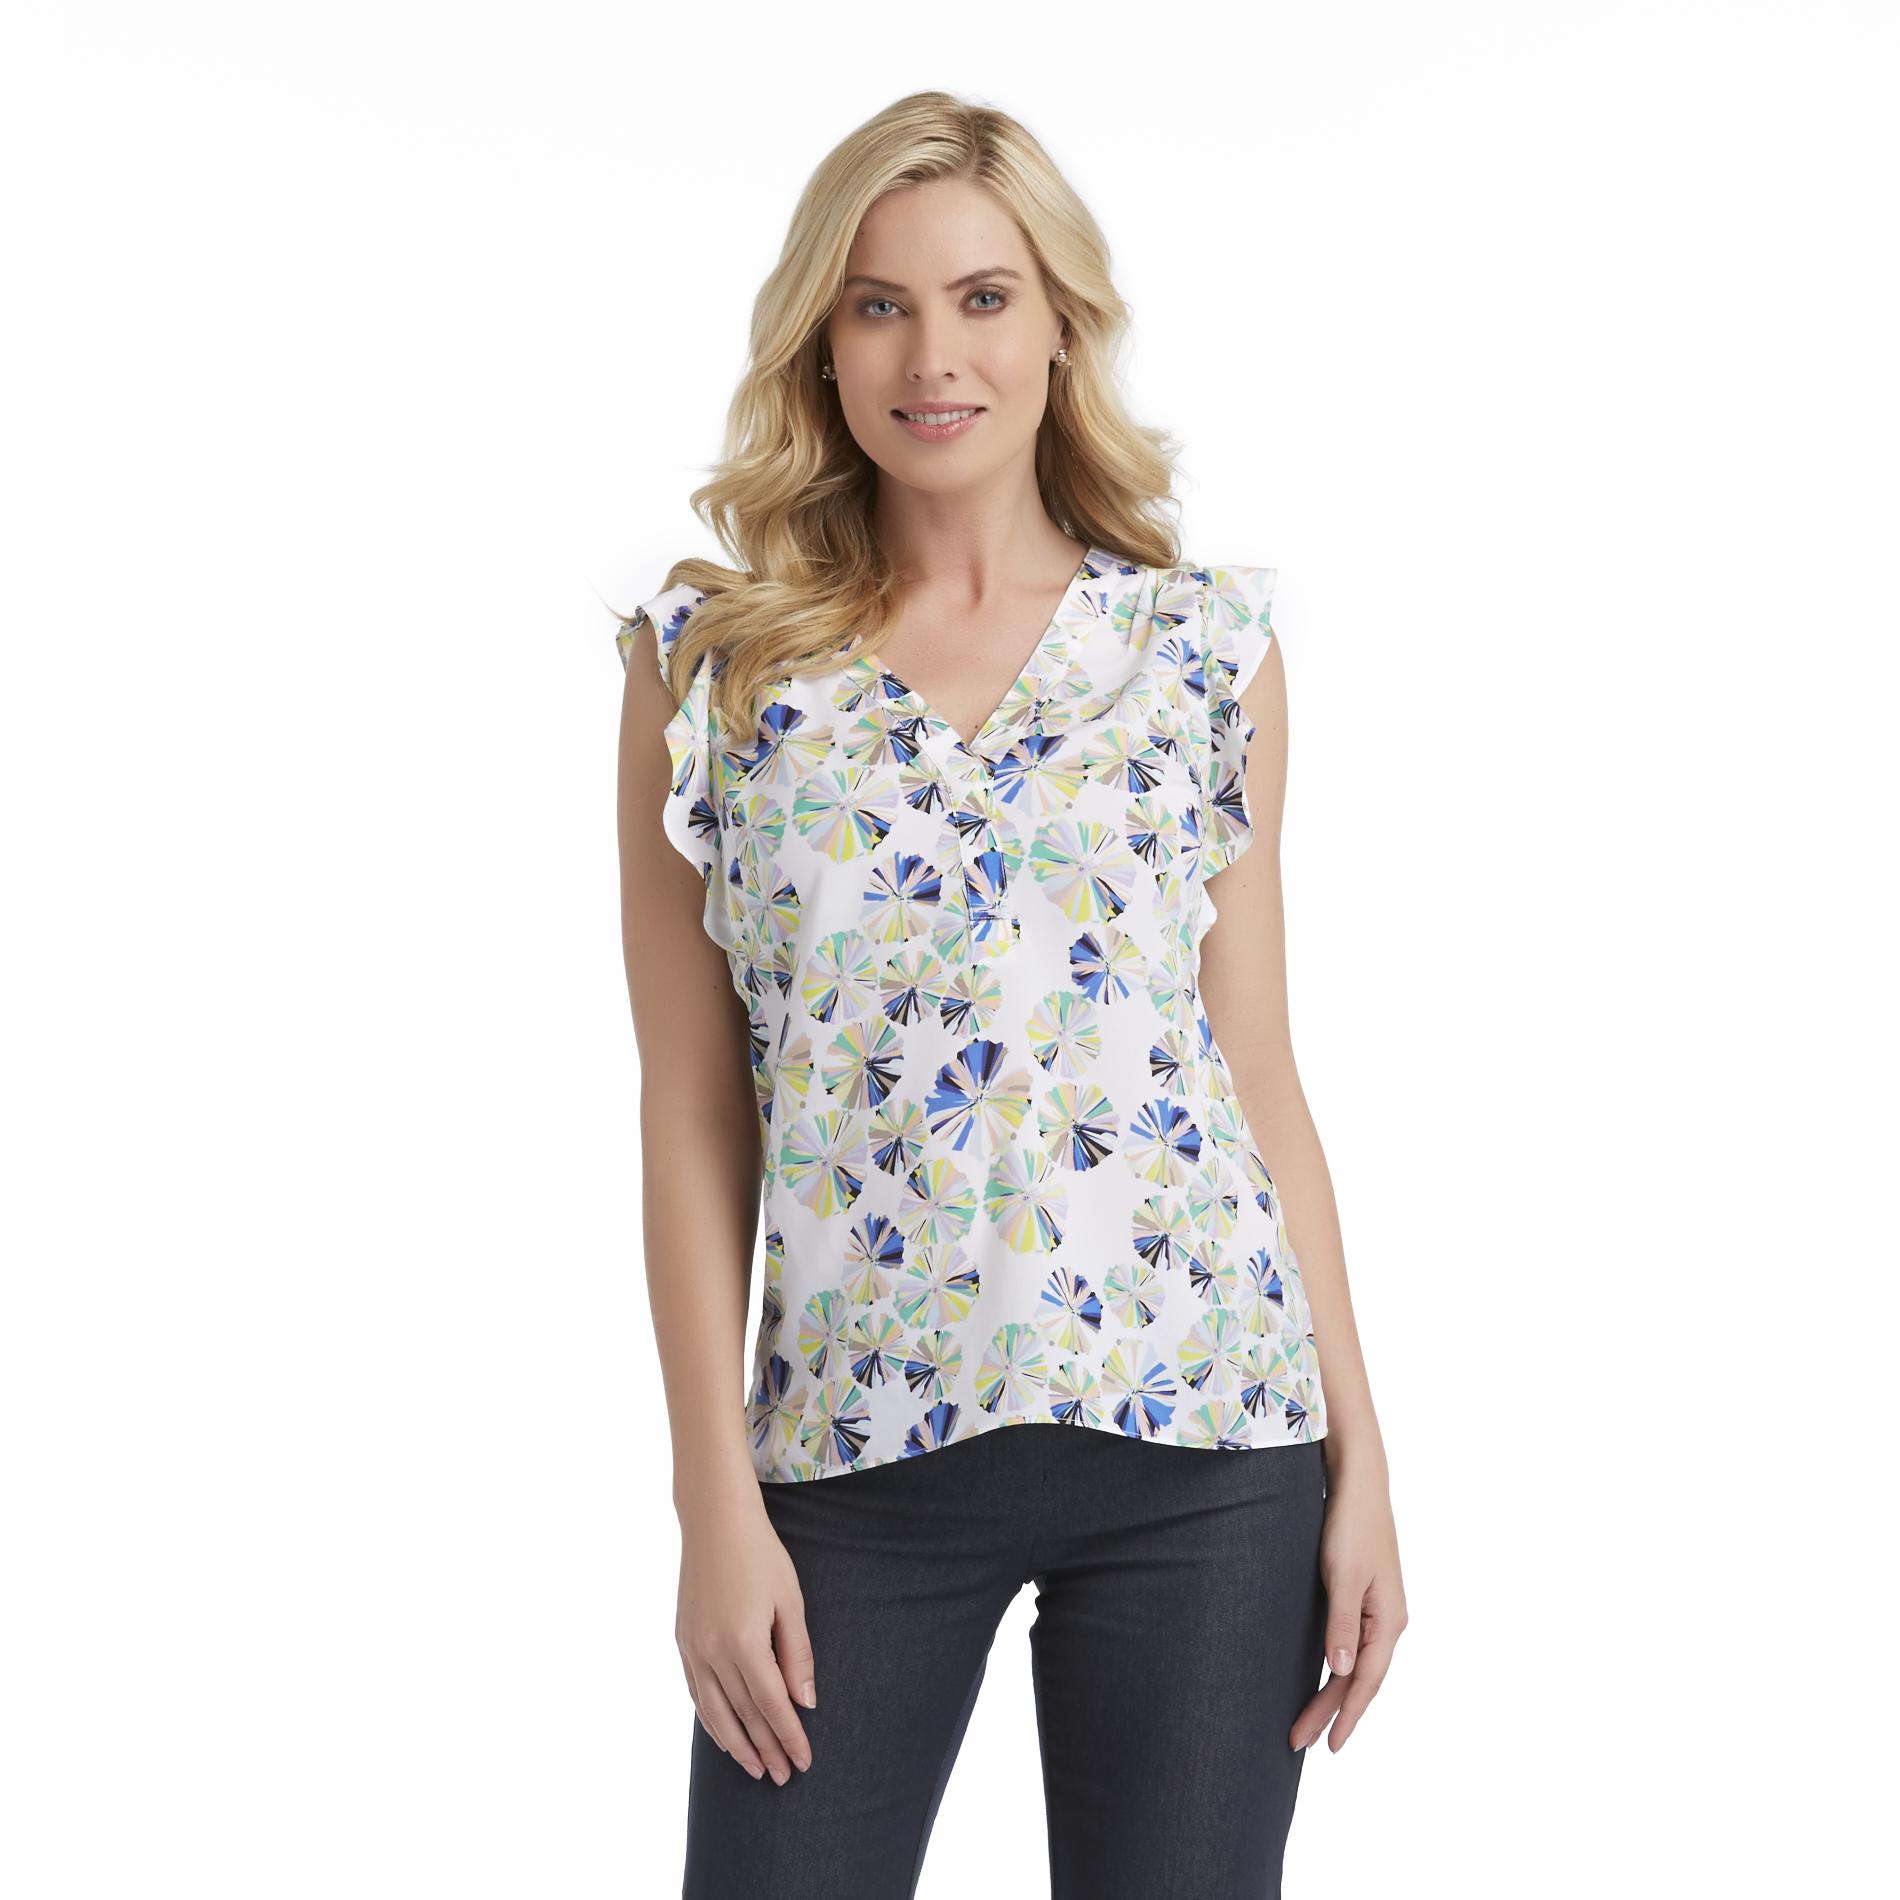 Attention Women's Chiffon Top - Floral